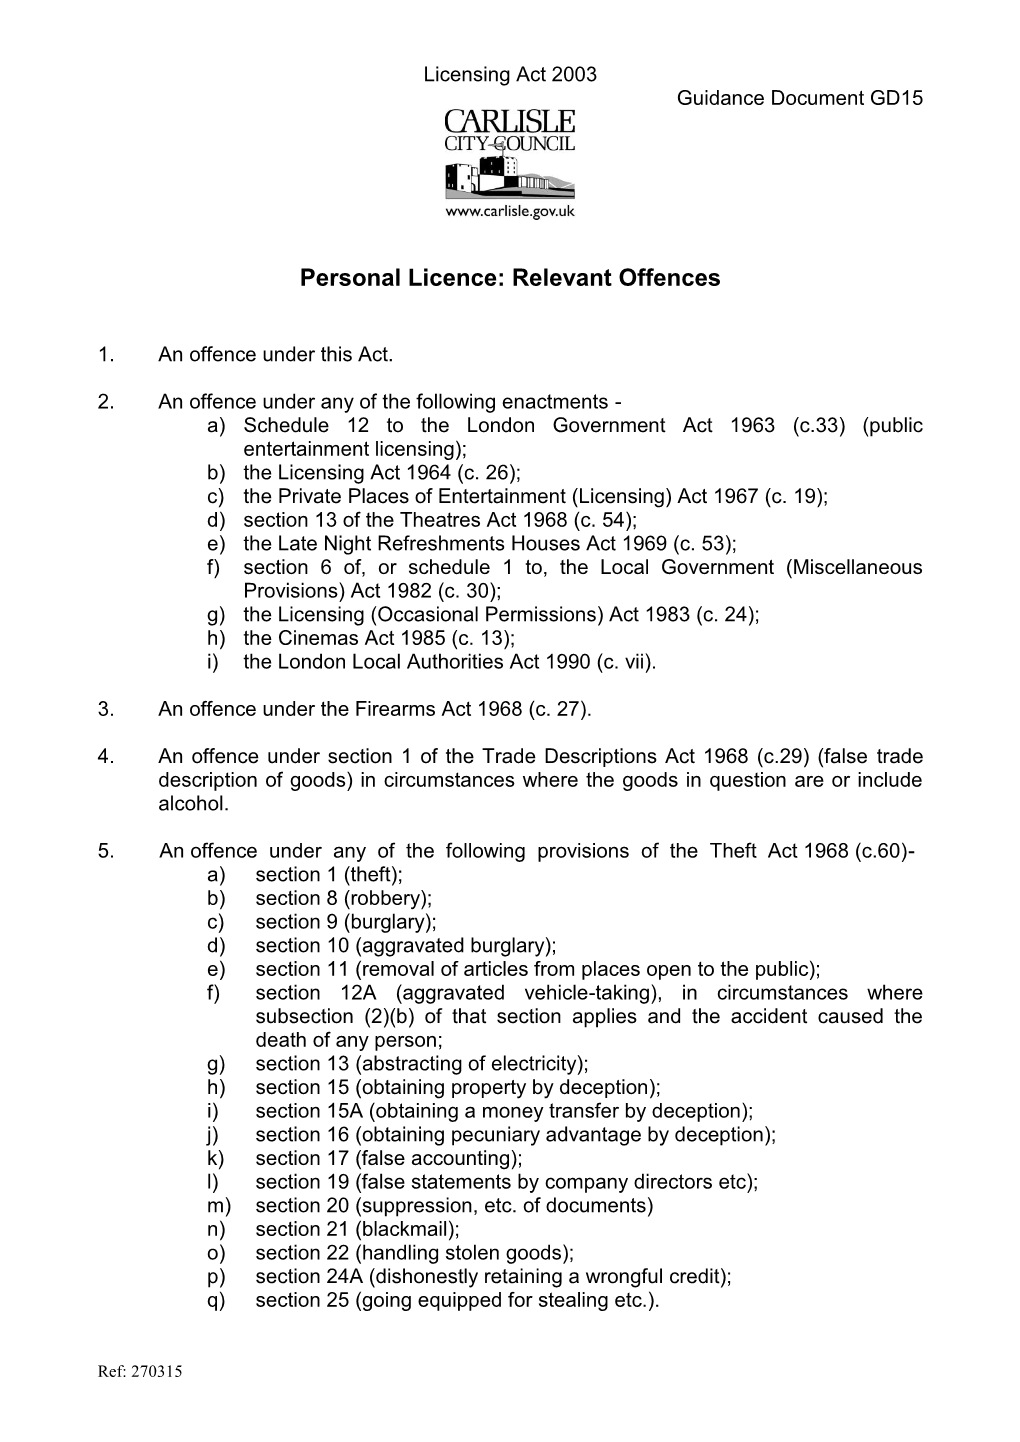 Relevant Offences